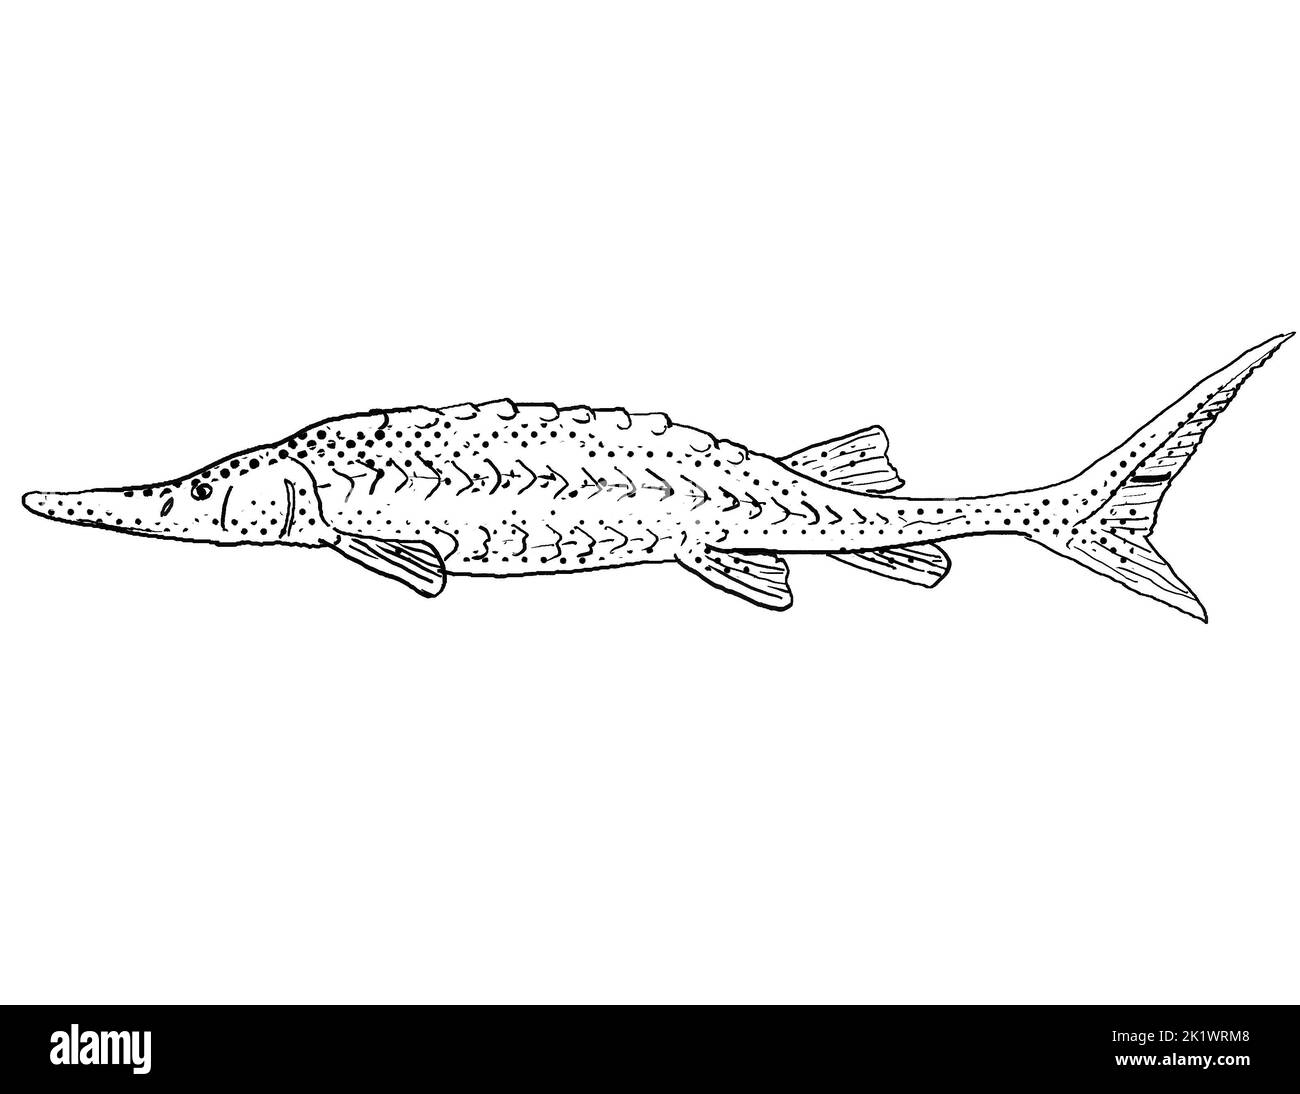 Cartoon style line drawing of a shovelnose sturgeon or Scaphirhynchus platorynchus a freshwater fish endemic to North America with halftone dots shadi Stock Photo